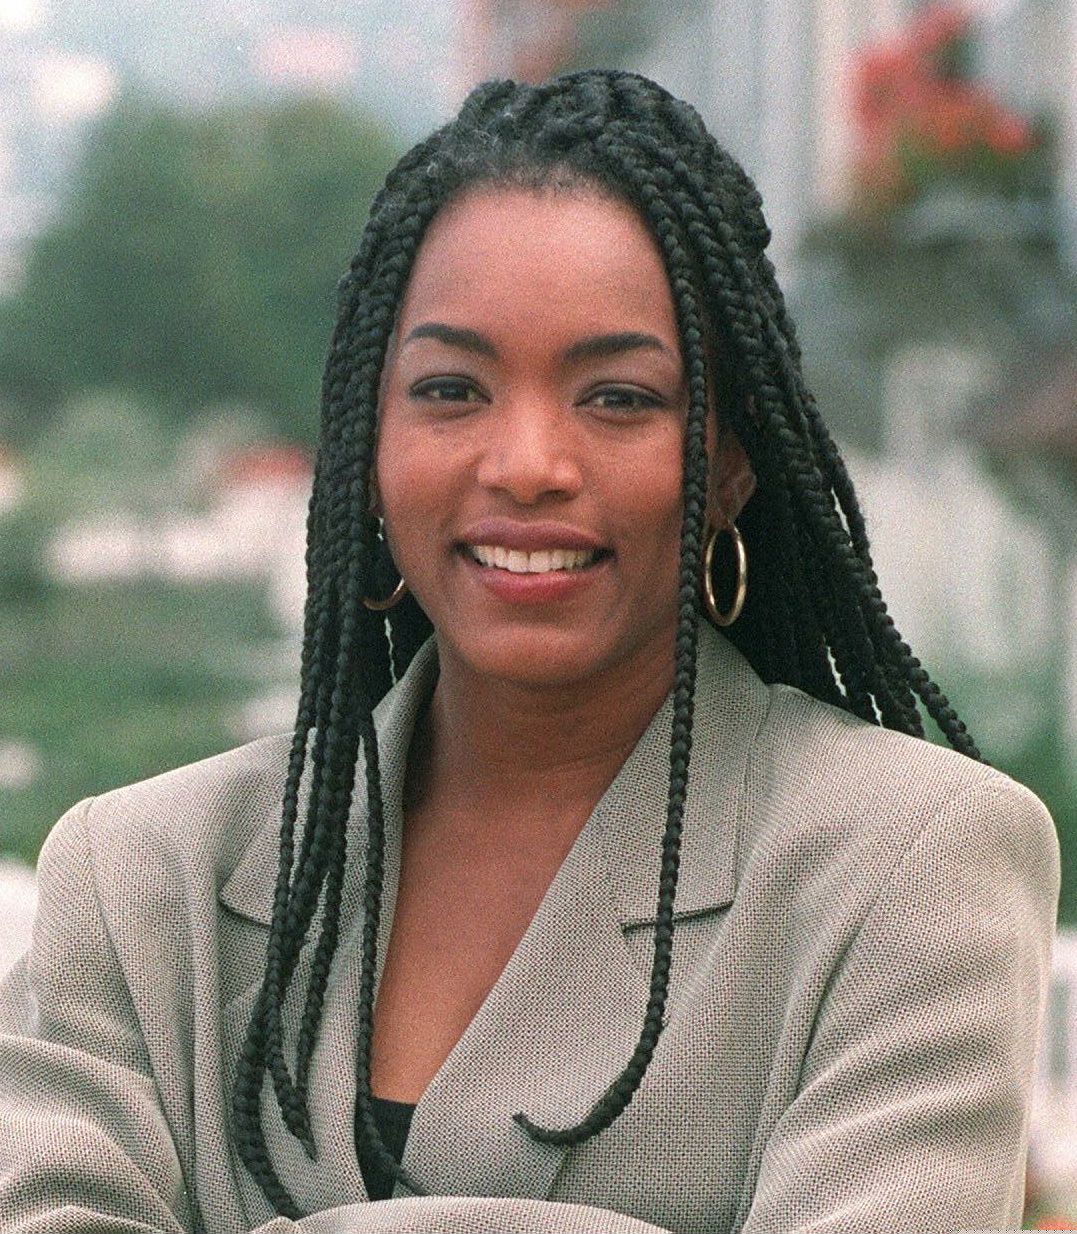 Angela Bassett pictured on September 11, 1993 in Deauville, Normandy. | Source: Getty Images